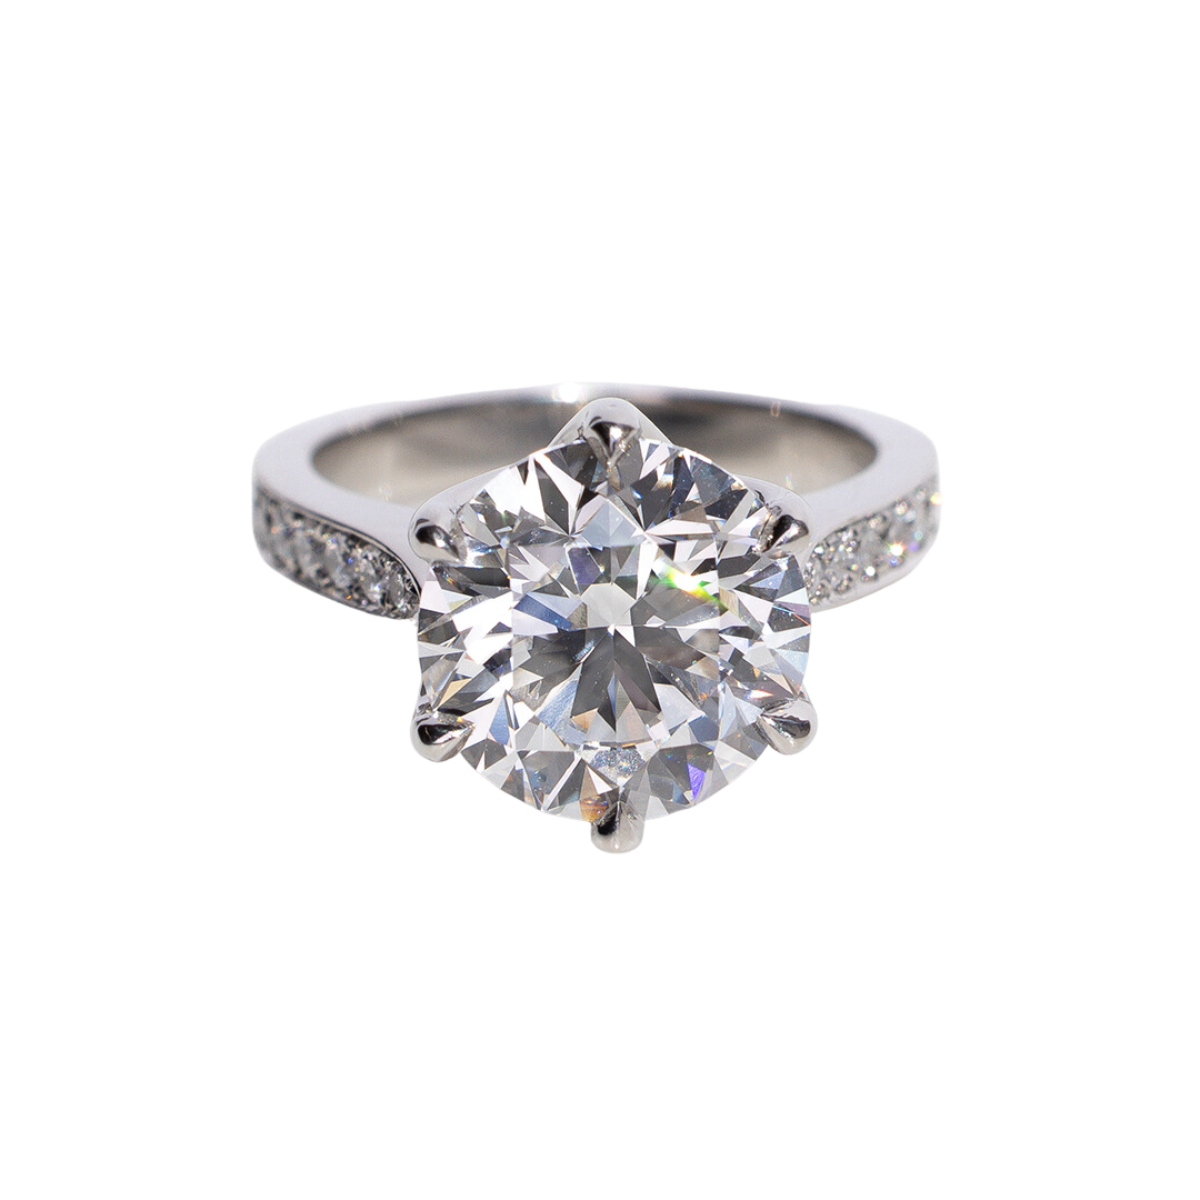 A custom designed platinum, five carat diamond engagement ring with six prongs. The ring's band features a smaller diamond pave design.   